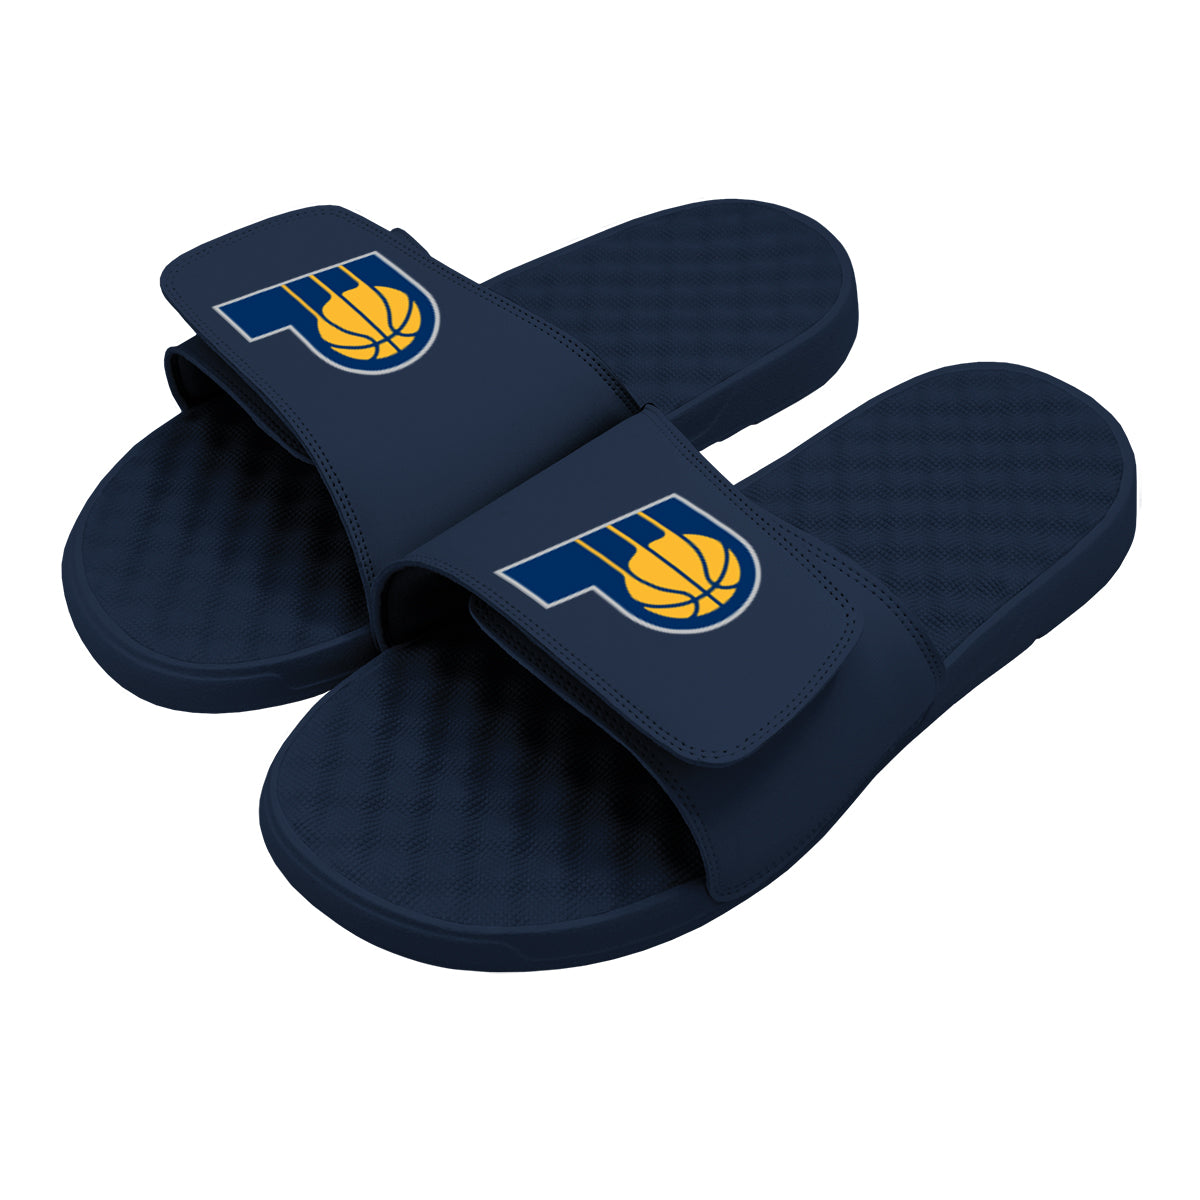 Indiana Pacers Primary Slides